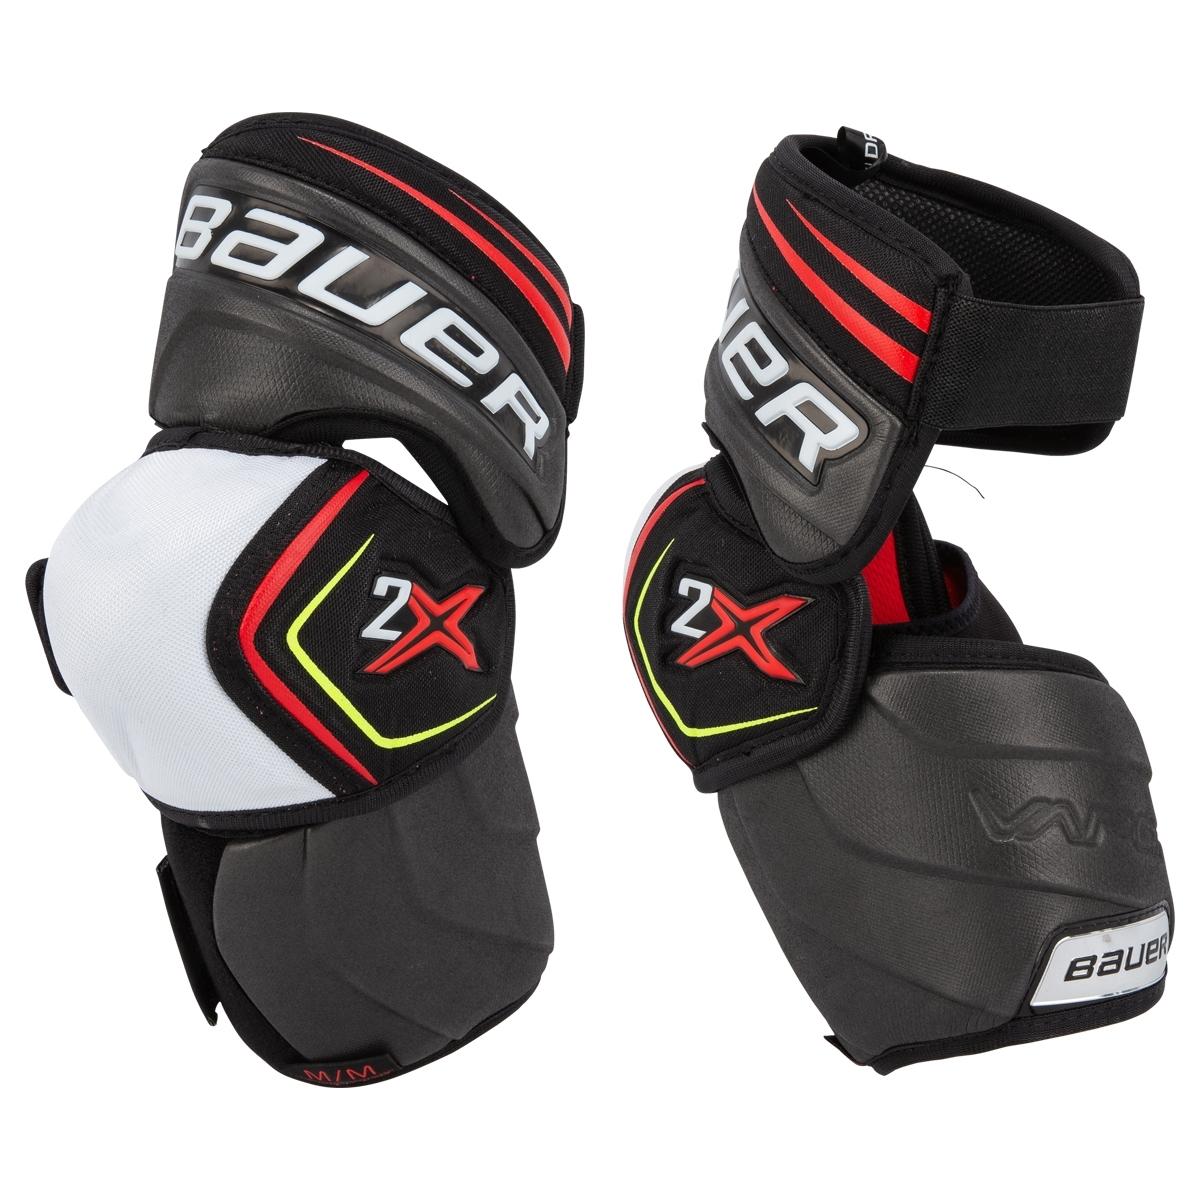 Bauer Vapor 2X Sr. Hockey Elbow Padsproduct zoom image #1